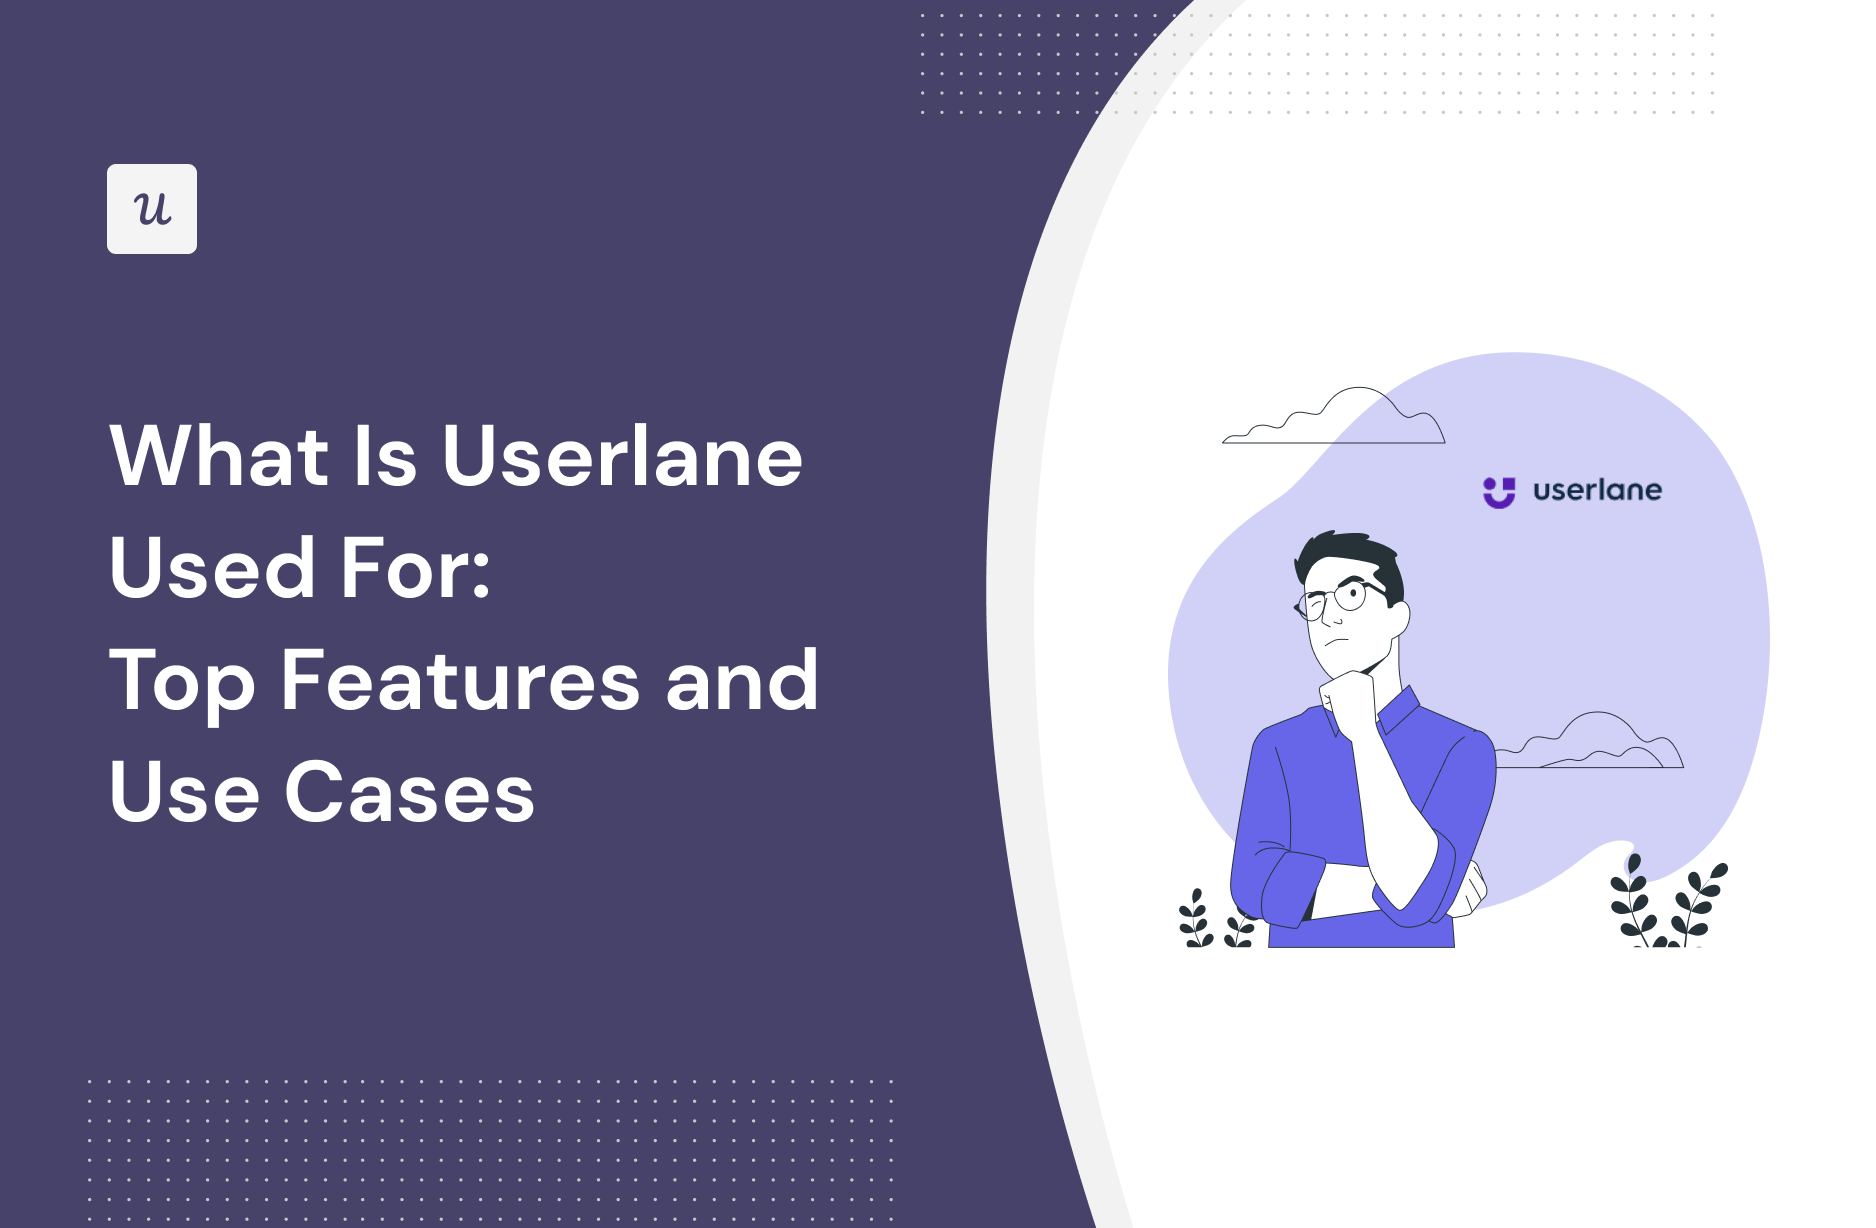 What Is Userlane Used For: Top Features and Use Cases